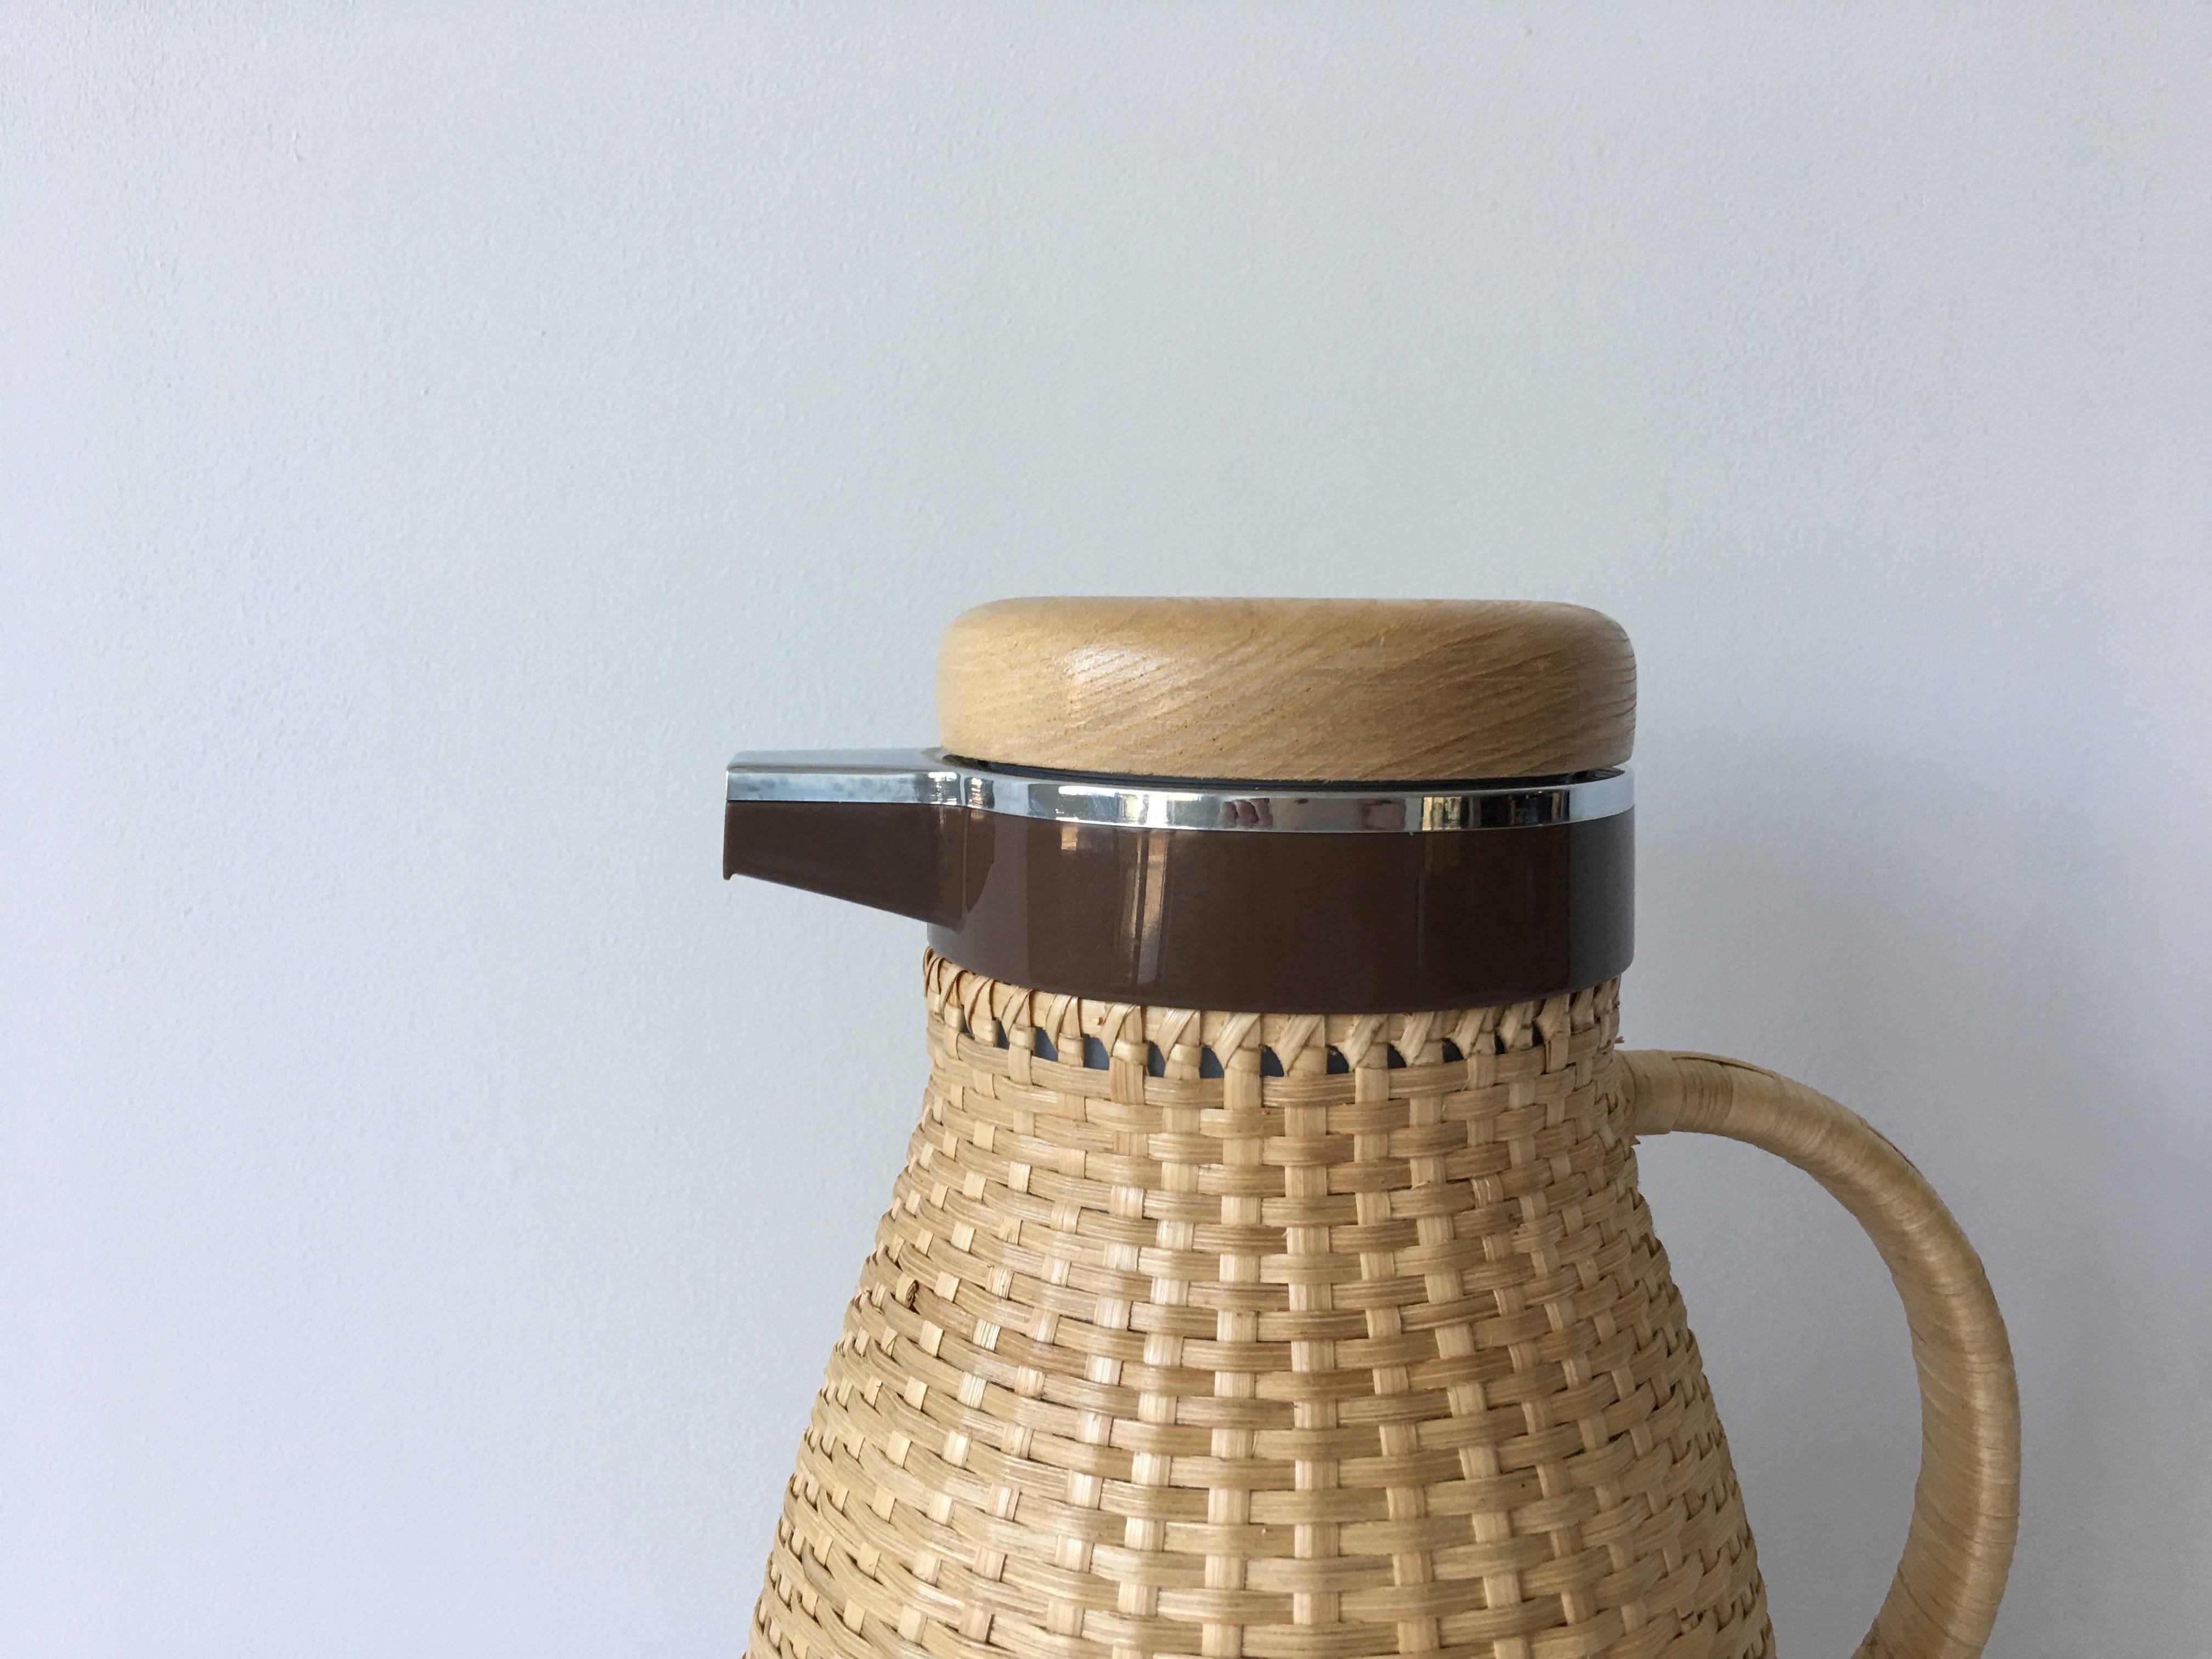 Immaculate 1960s, Mid-Century Modern rattan carafe. Never used!